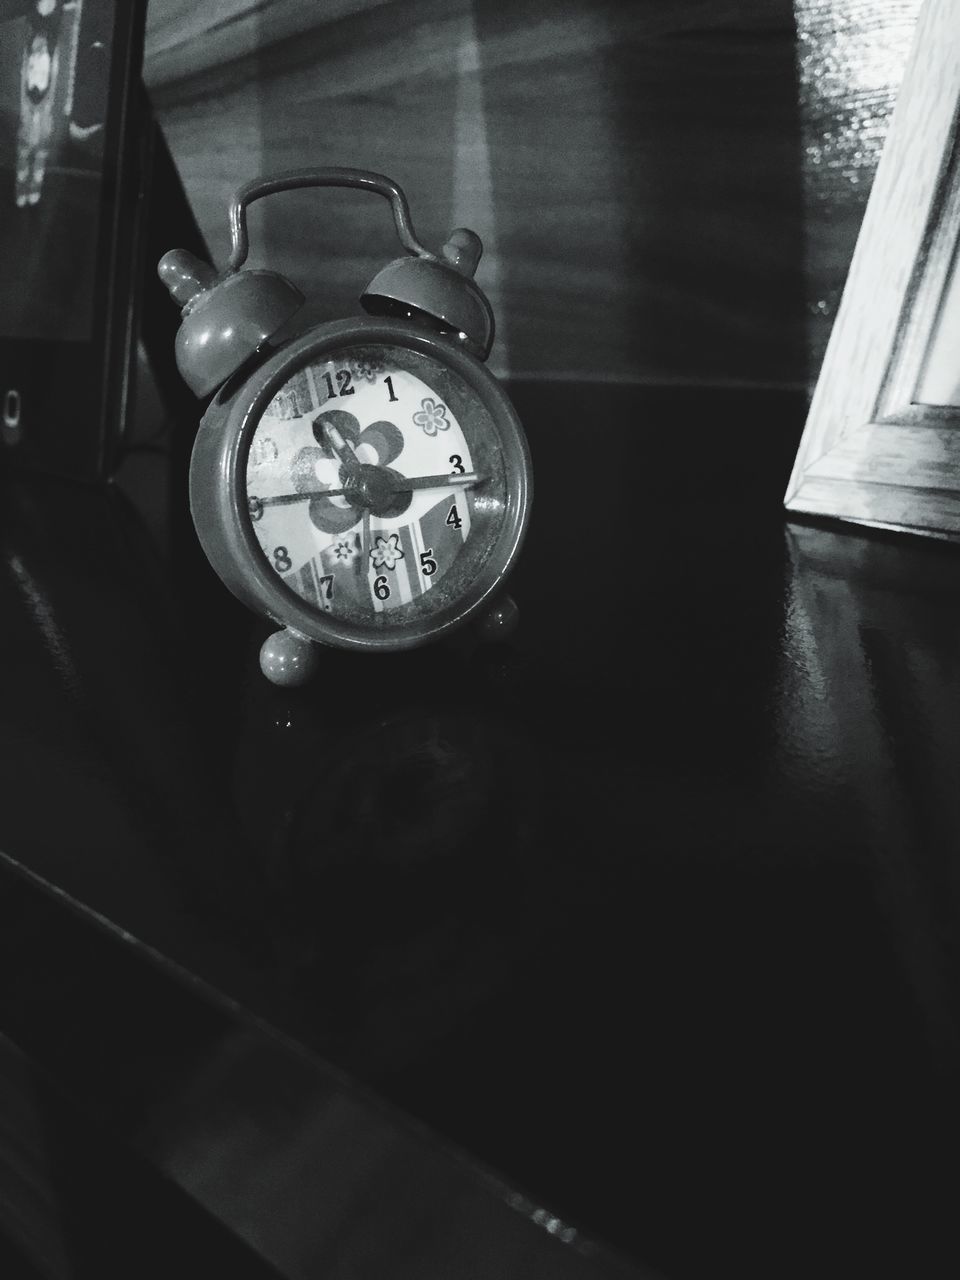 time, indoors, clock, old-fashioned, number, retro styled, clock face, antique, accuracy, close-up, circle, technology, low angle view, no people, minute hand, old, roman numeral, history, reflection, text